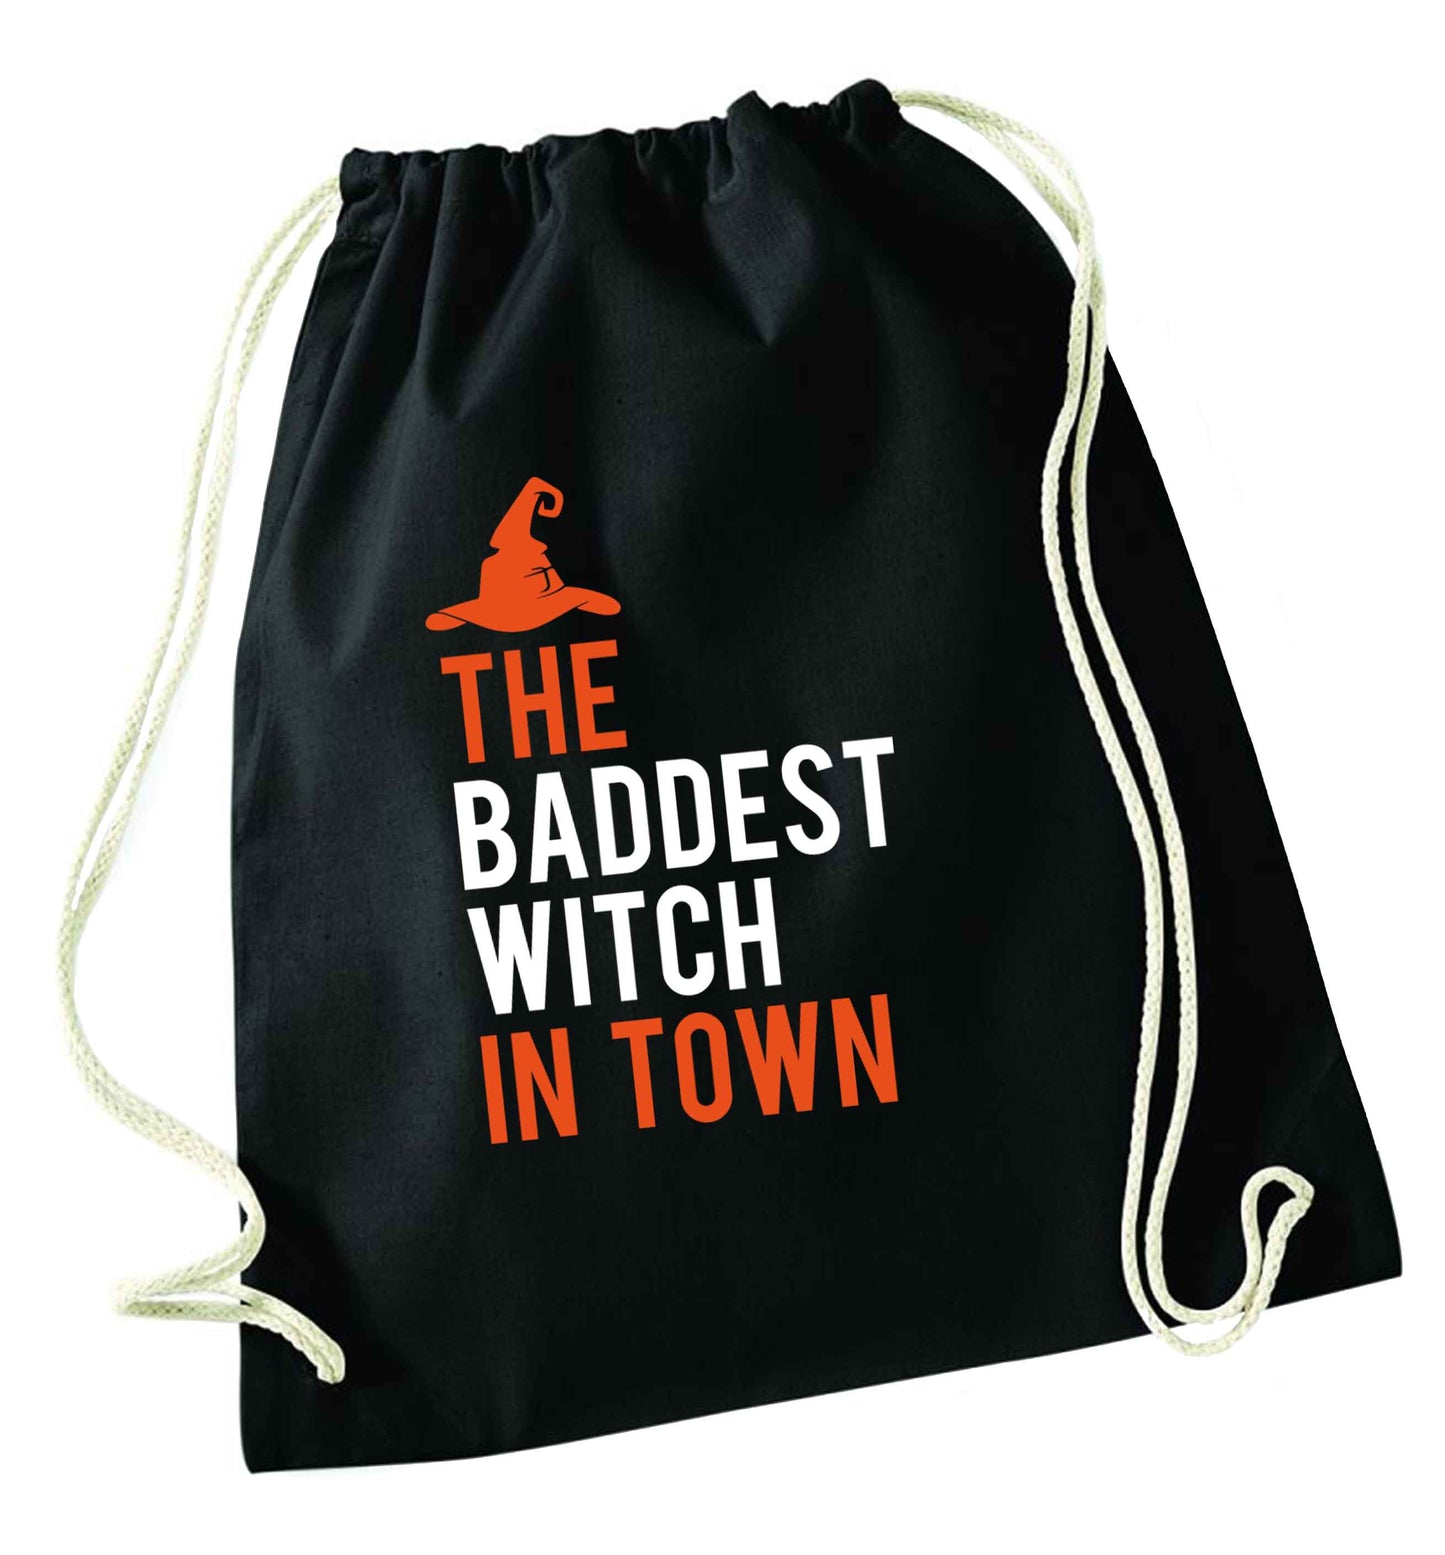 Badest witch in town black drawstring bag